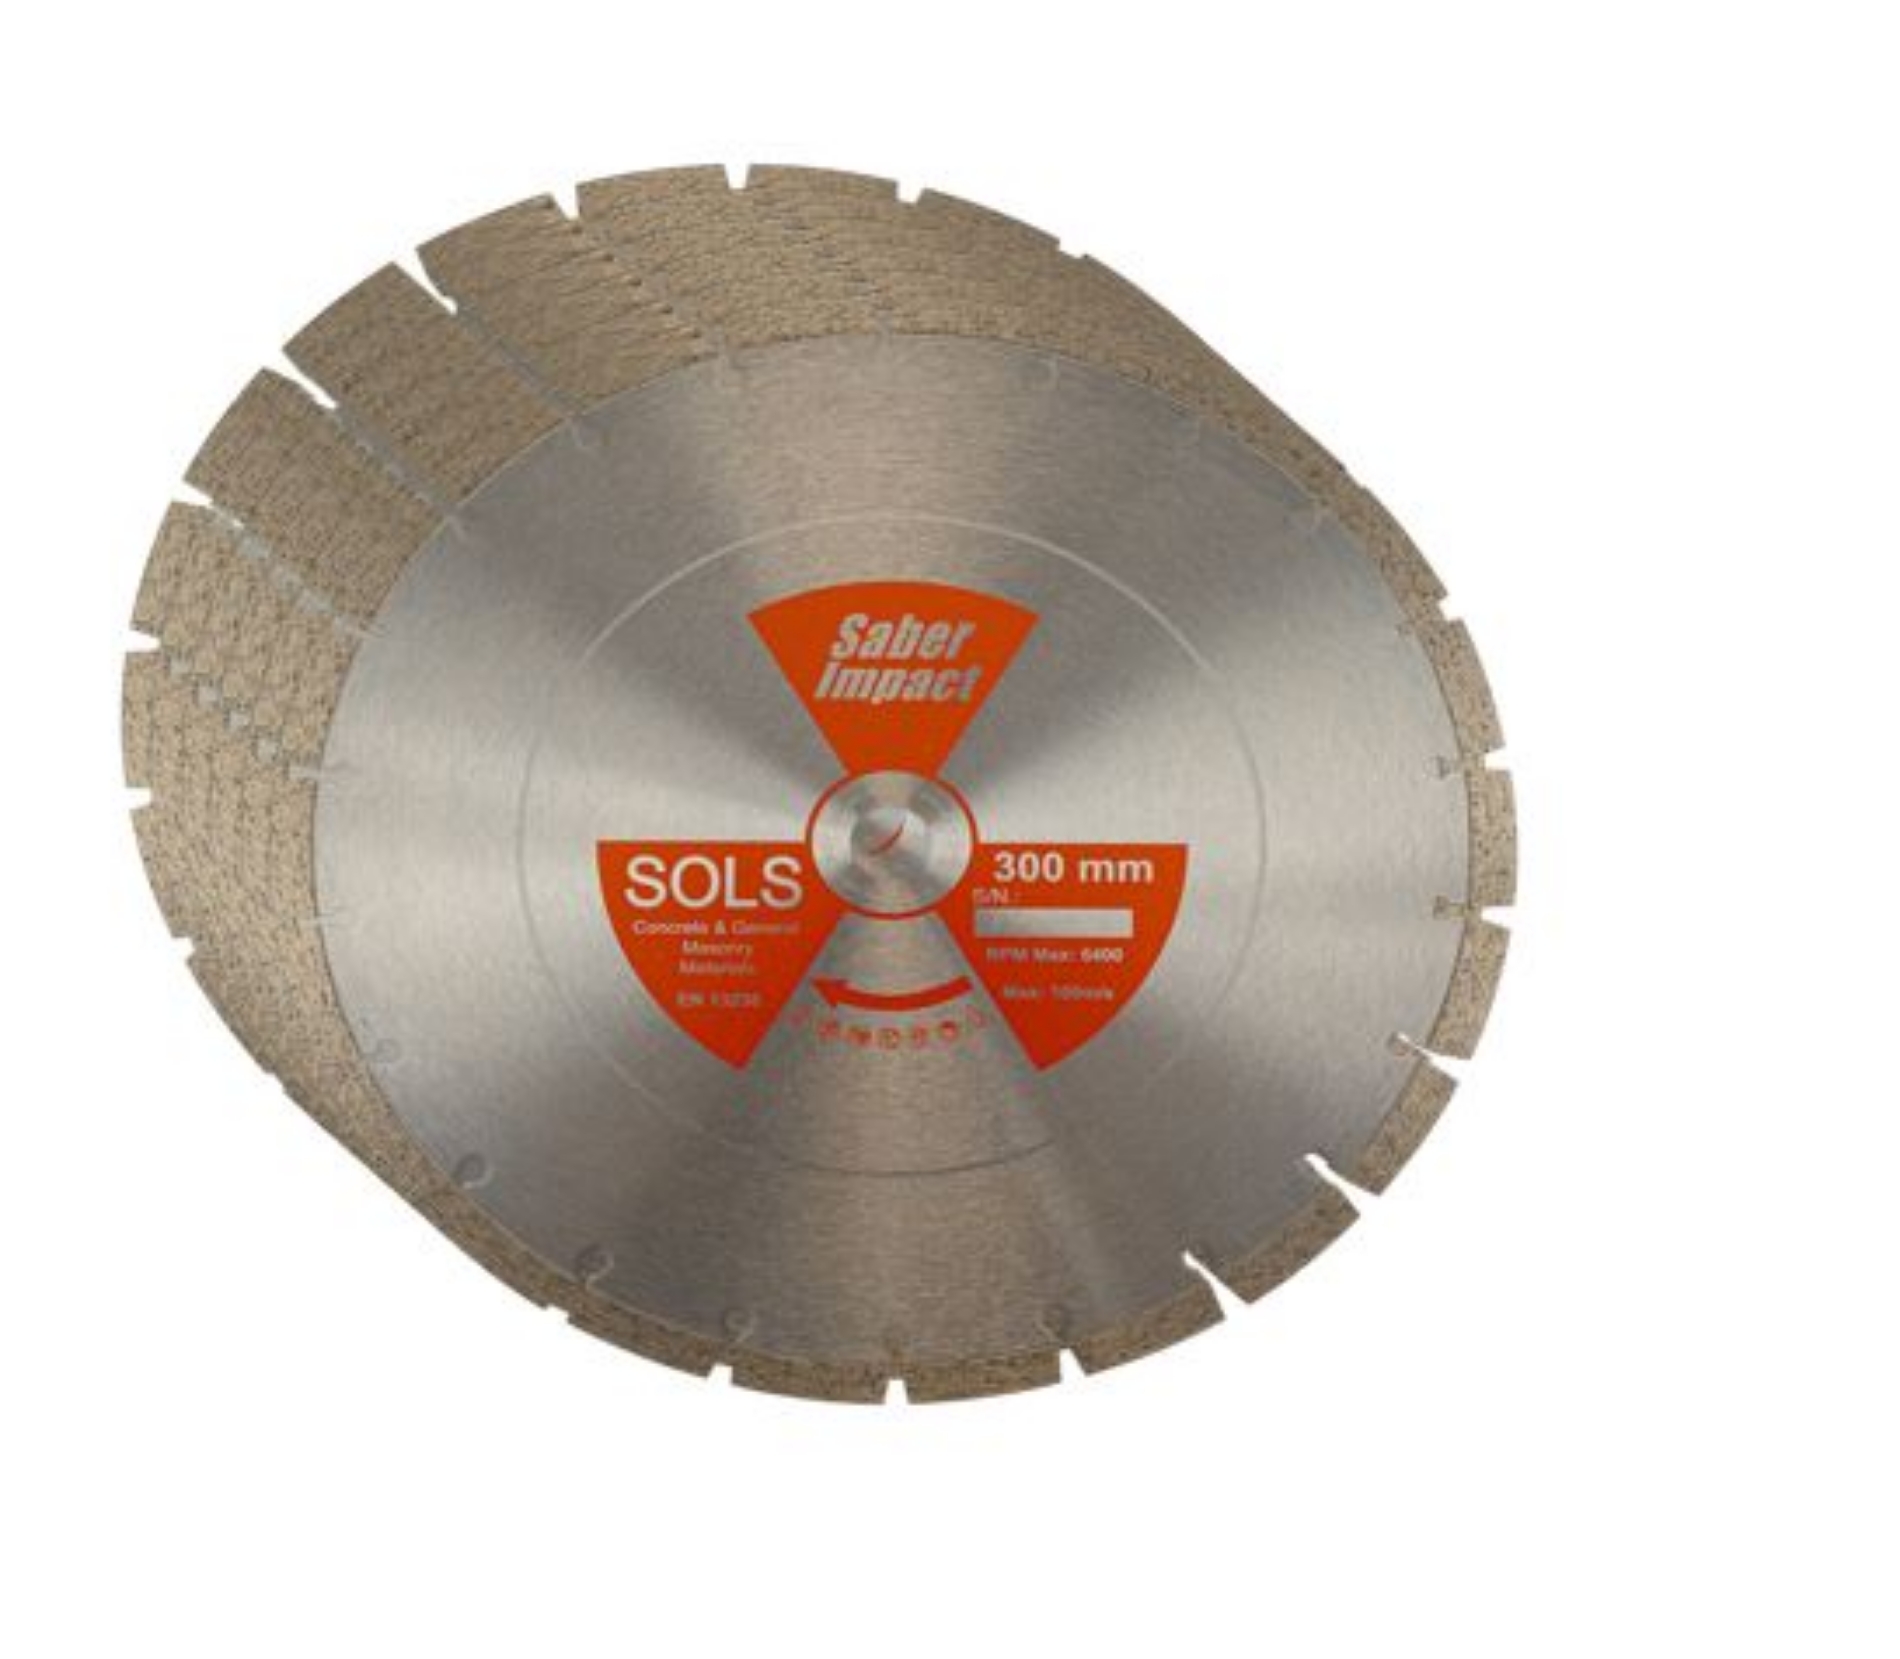 Picture of Saber Sols Solar Sintered Diamond Blade BUY 10 GET 1 FREE (300mm x 20mm)